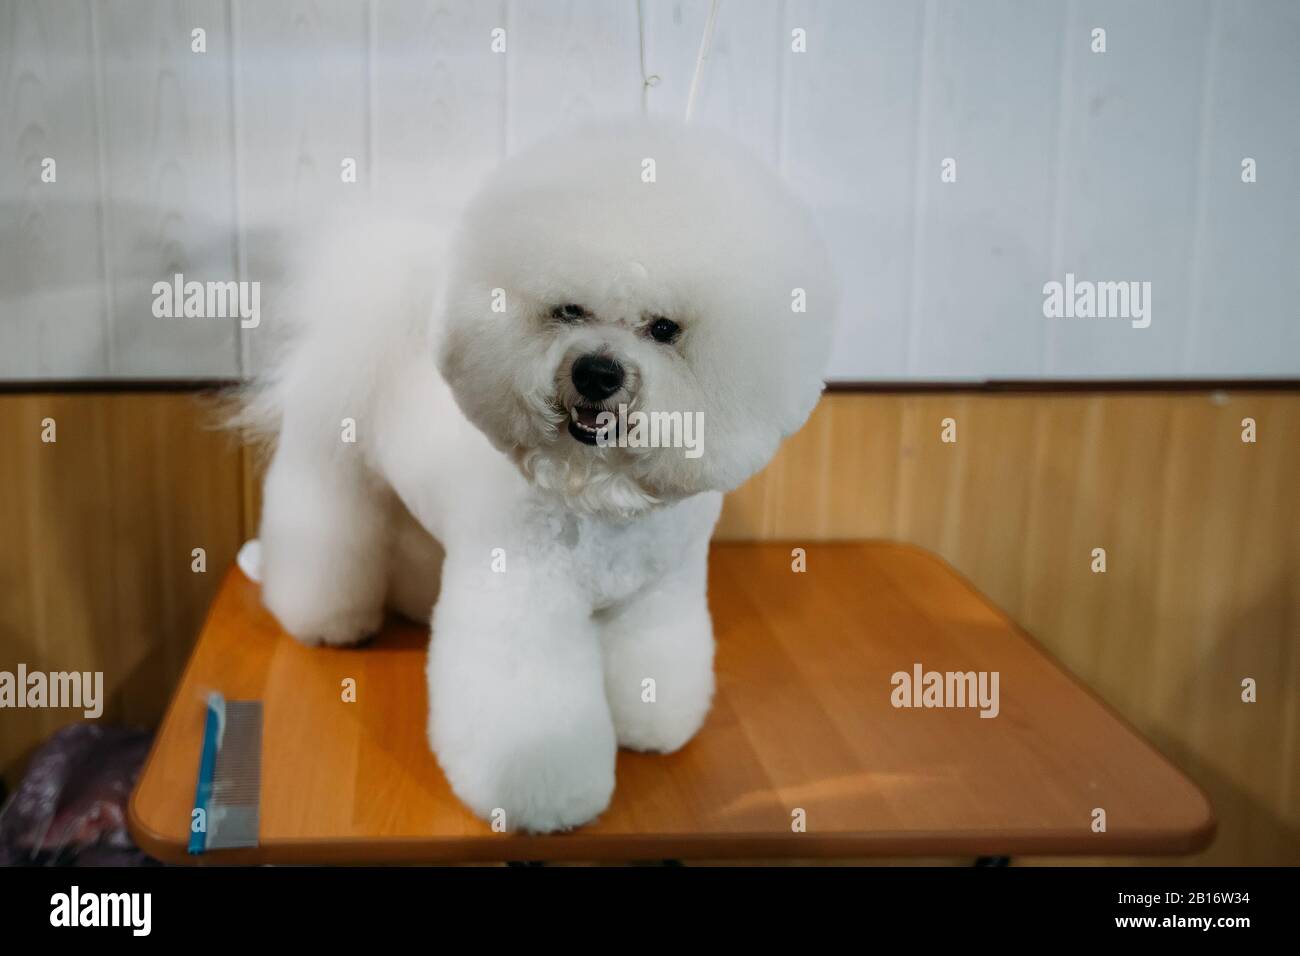 Dog Bichon Frise standing on the table Stock Photo - Alamy